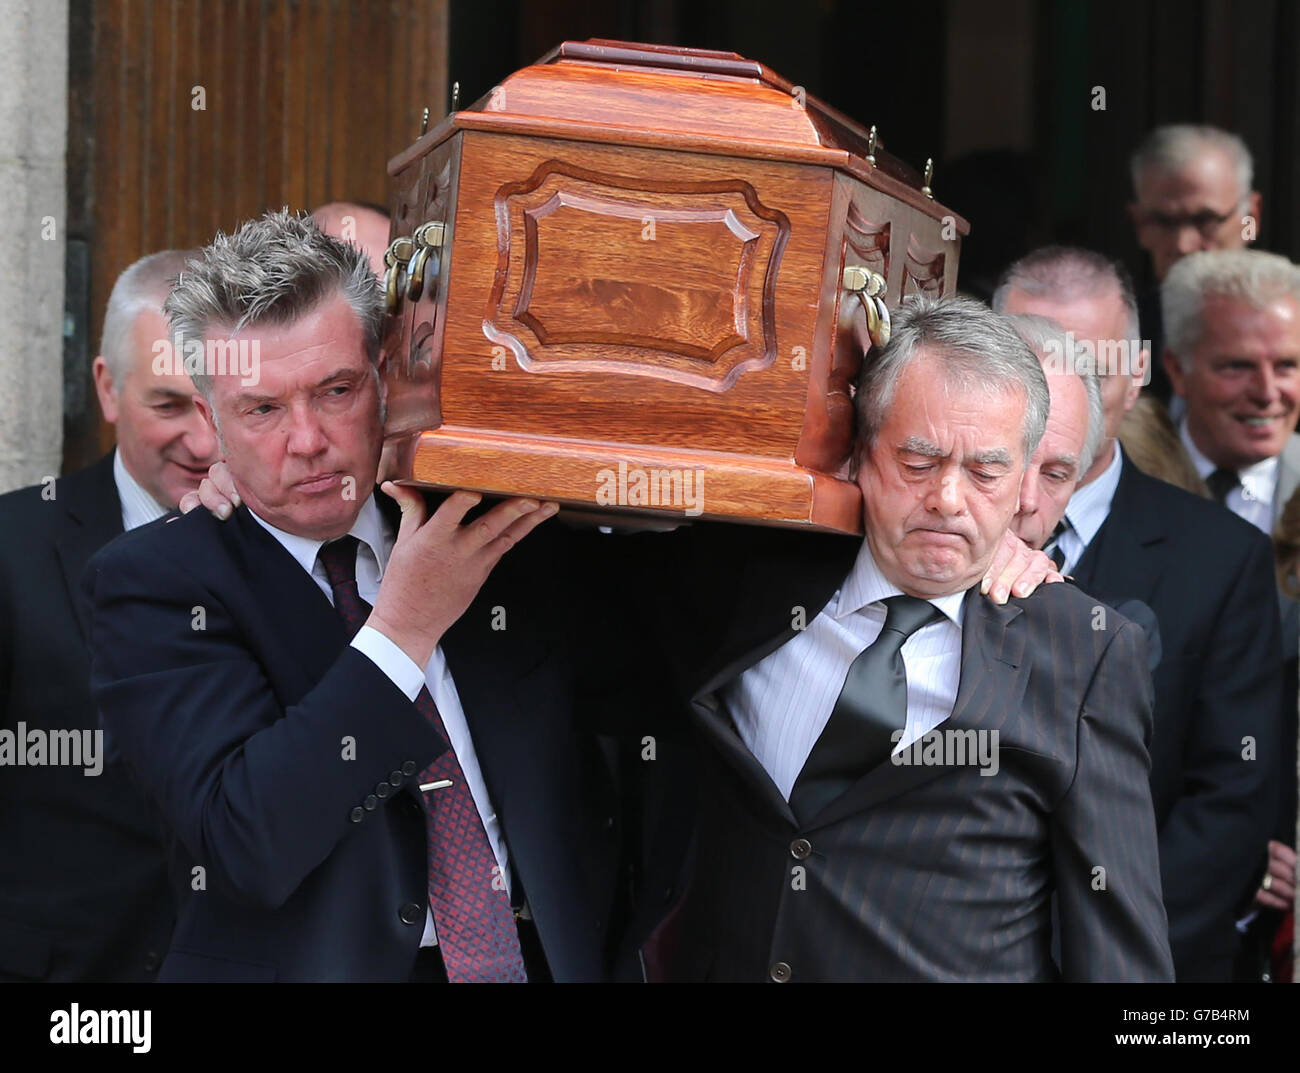 The coffin is carried by Undertones Bass Guitar player and Radio Ulster Producer Michael Bradley (left) and Co-Host Sean Coyle (right) during the funeral of BBC broadcaster Gerry Anderson at St Eugene's Cathedral in Londonderry. Stock Photo